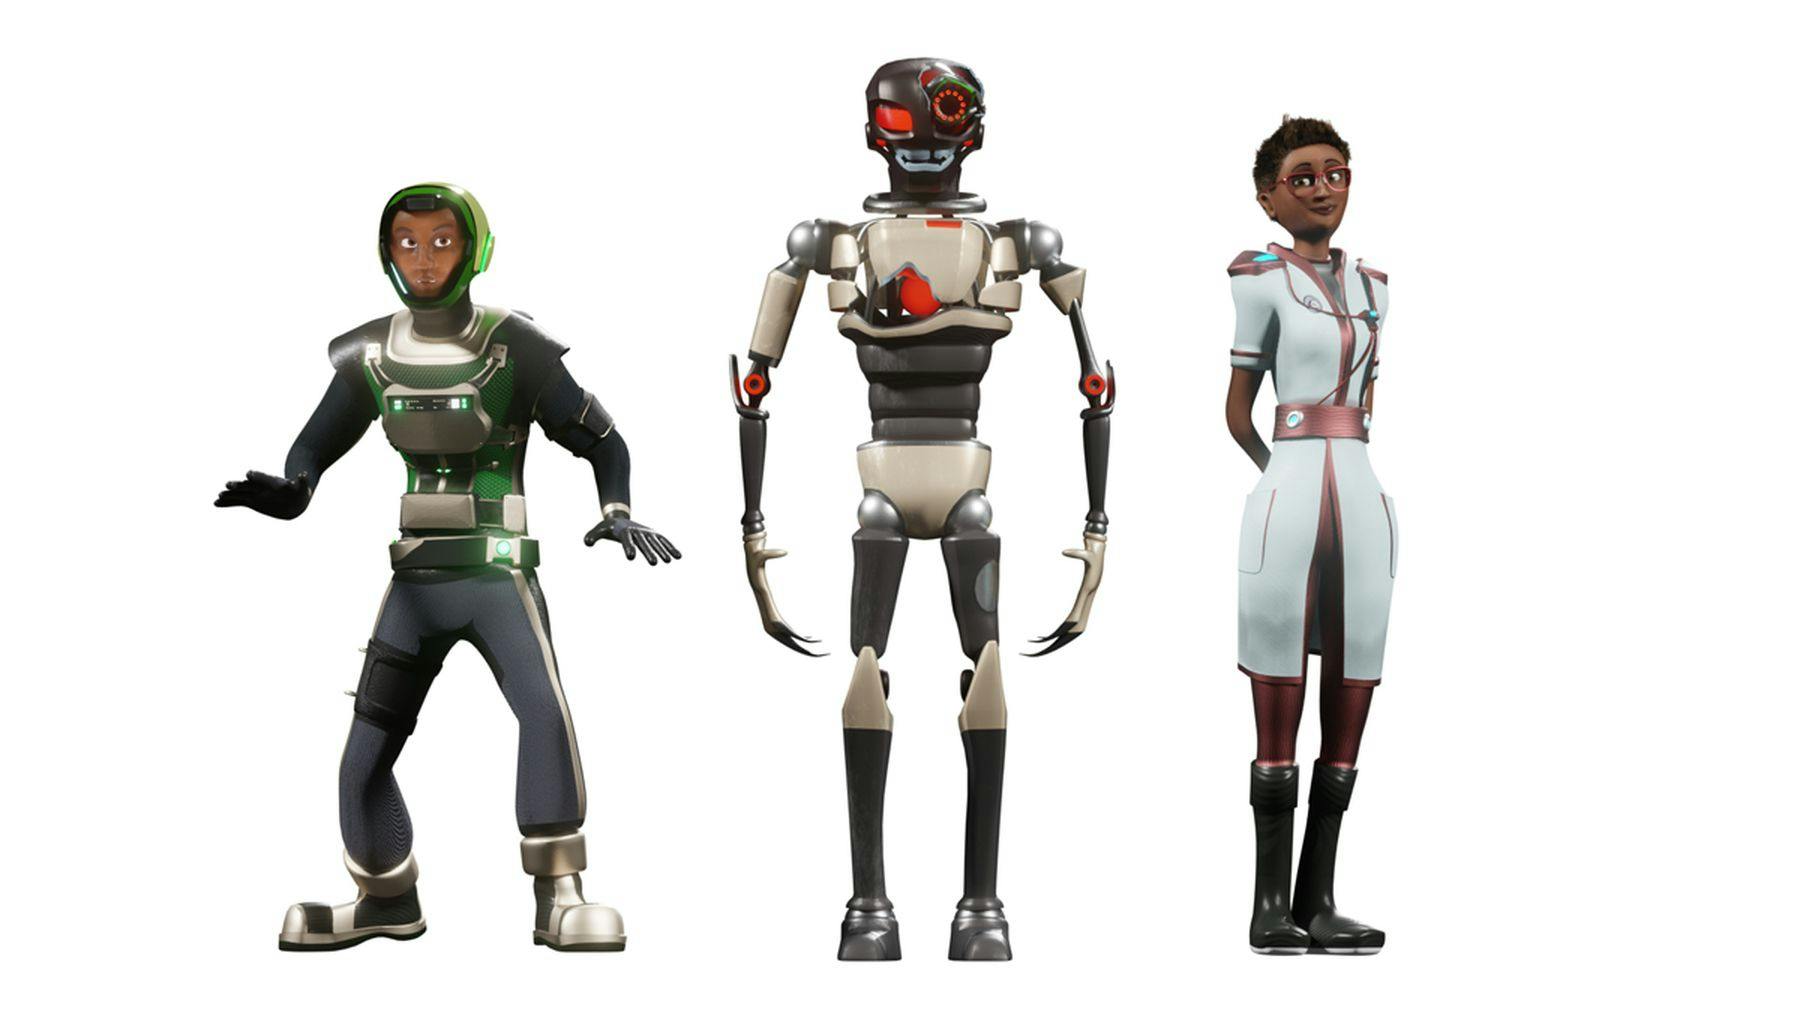 A digital drawing of three characters.. The first character is a person wearing a helmet and body suit. The second is a white and grey robot and the third is a doctor with a stethoscope around their neck.